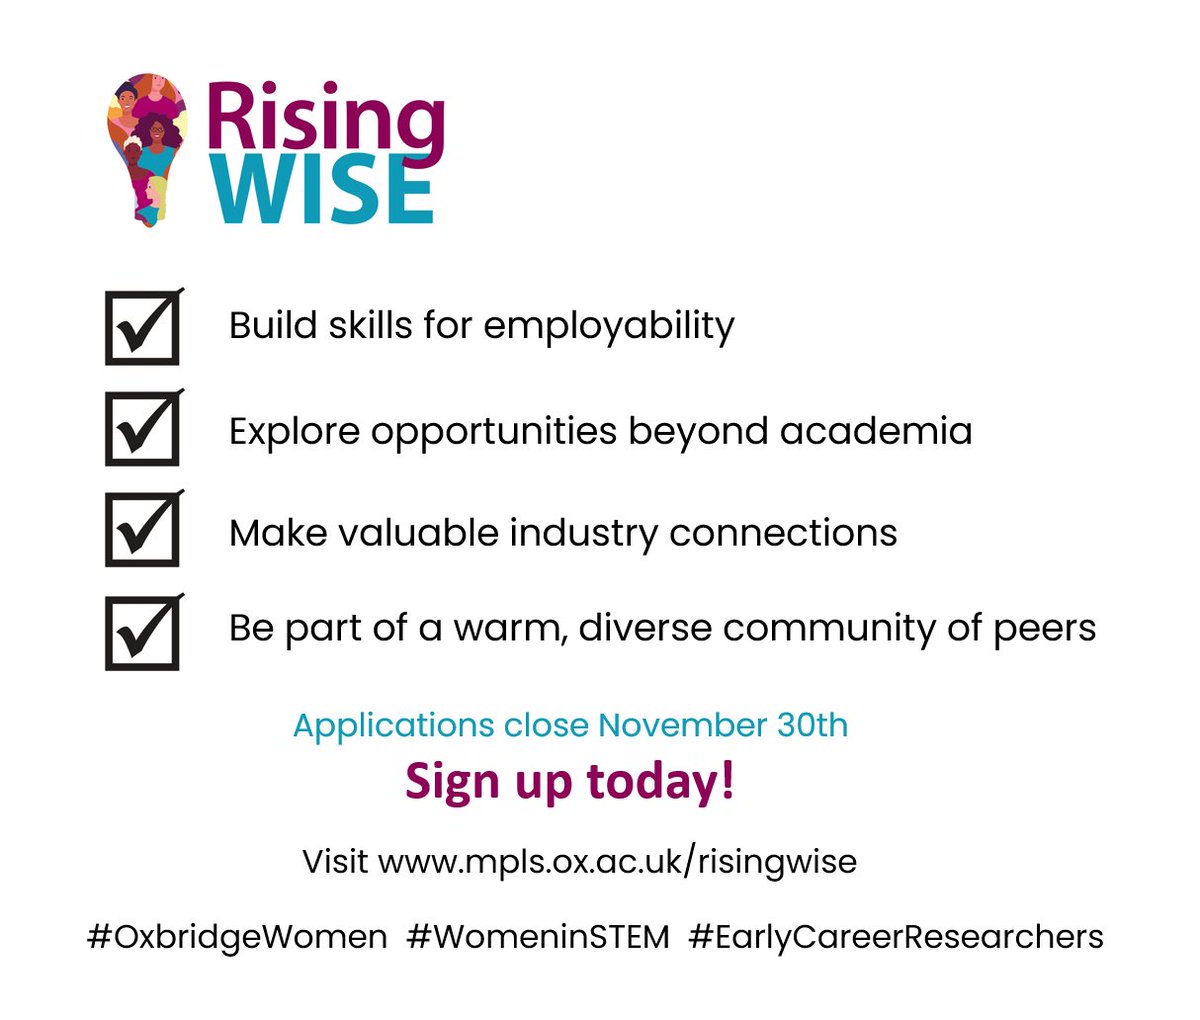 Applications now OPEN! Are you a #womeninstem #researcher @UniOfOxford or @UniOfCambridge? Join #RisingWISE and gain #community #womensupportingwomen #enterprise #skills #career perspectives and more! mpls.ox.ac.uk/risingwise @valuesdoc @mplsoxford @enterprisingox @OxfordECentre